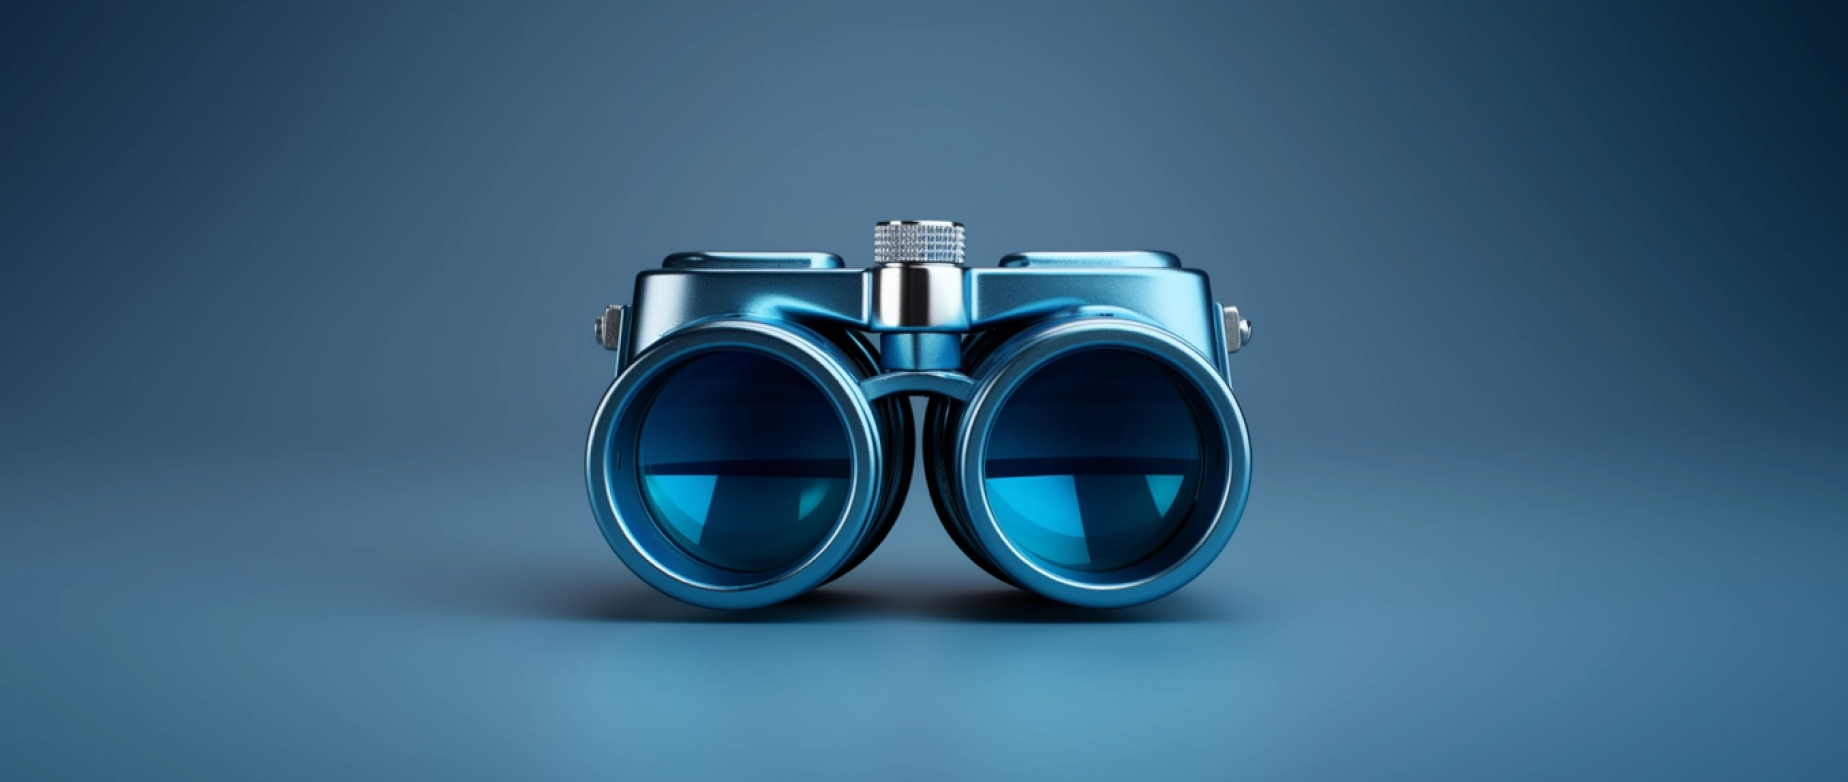 Illustration of a pair of binoculars representing the concept of sales prospecting.